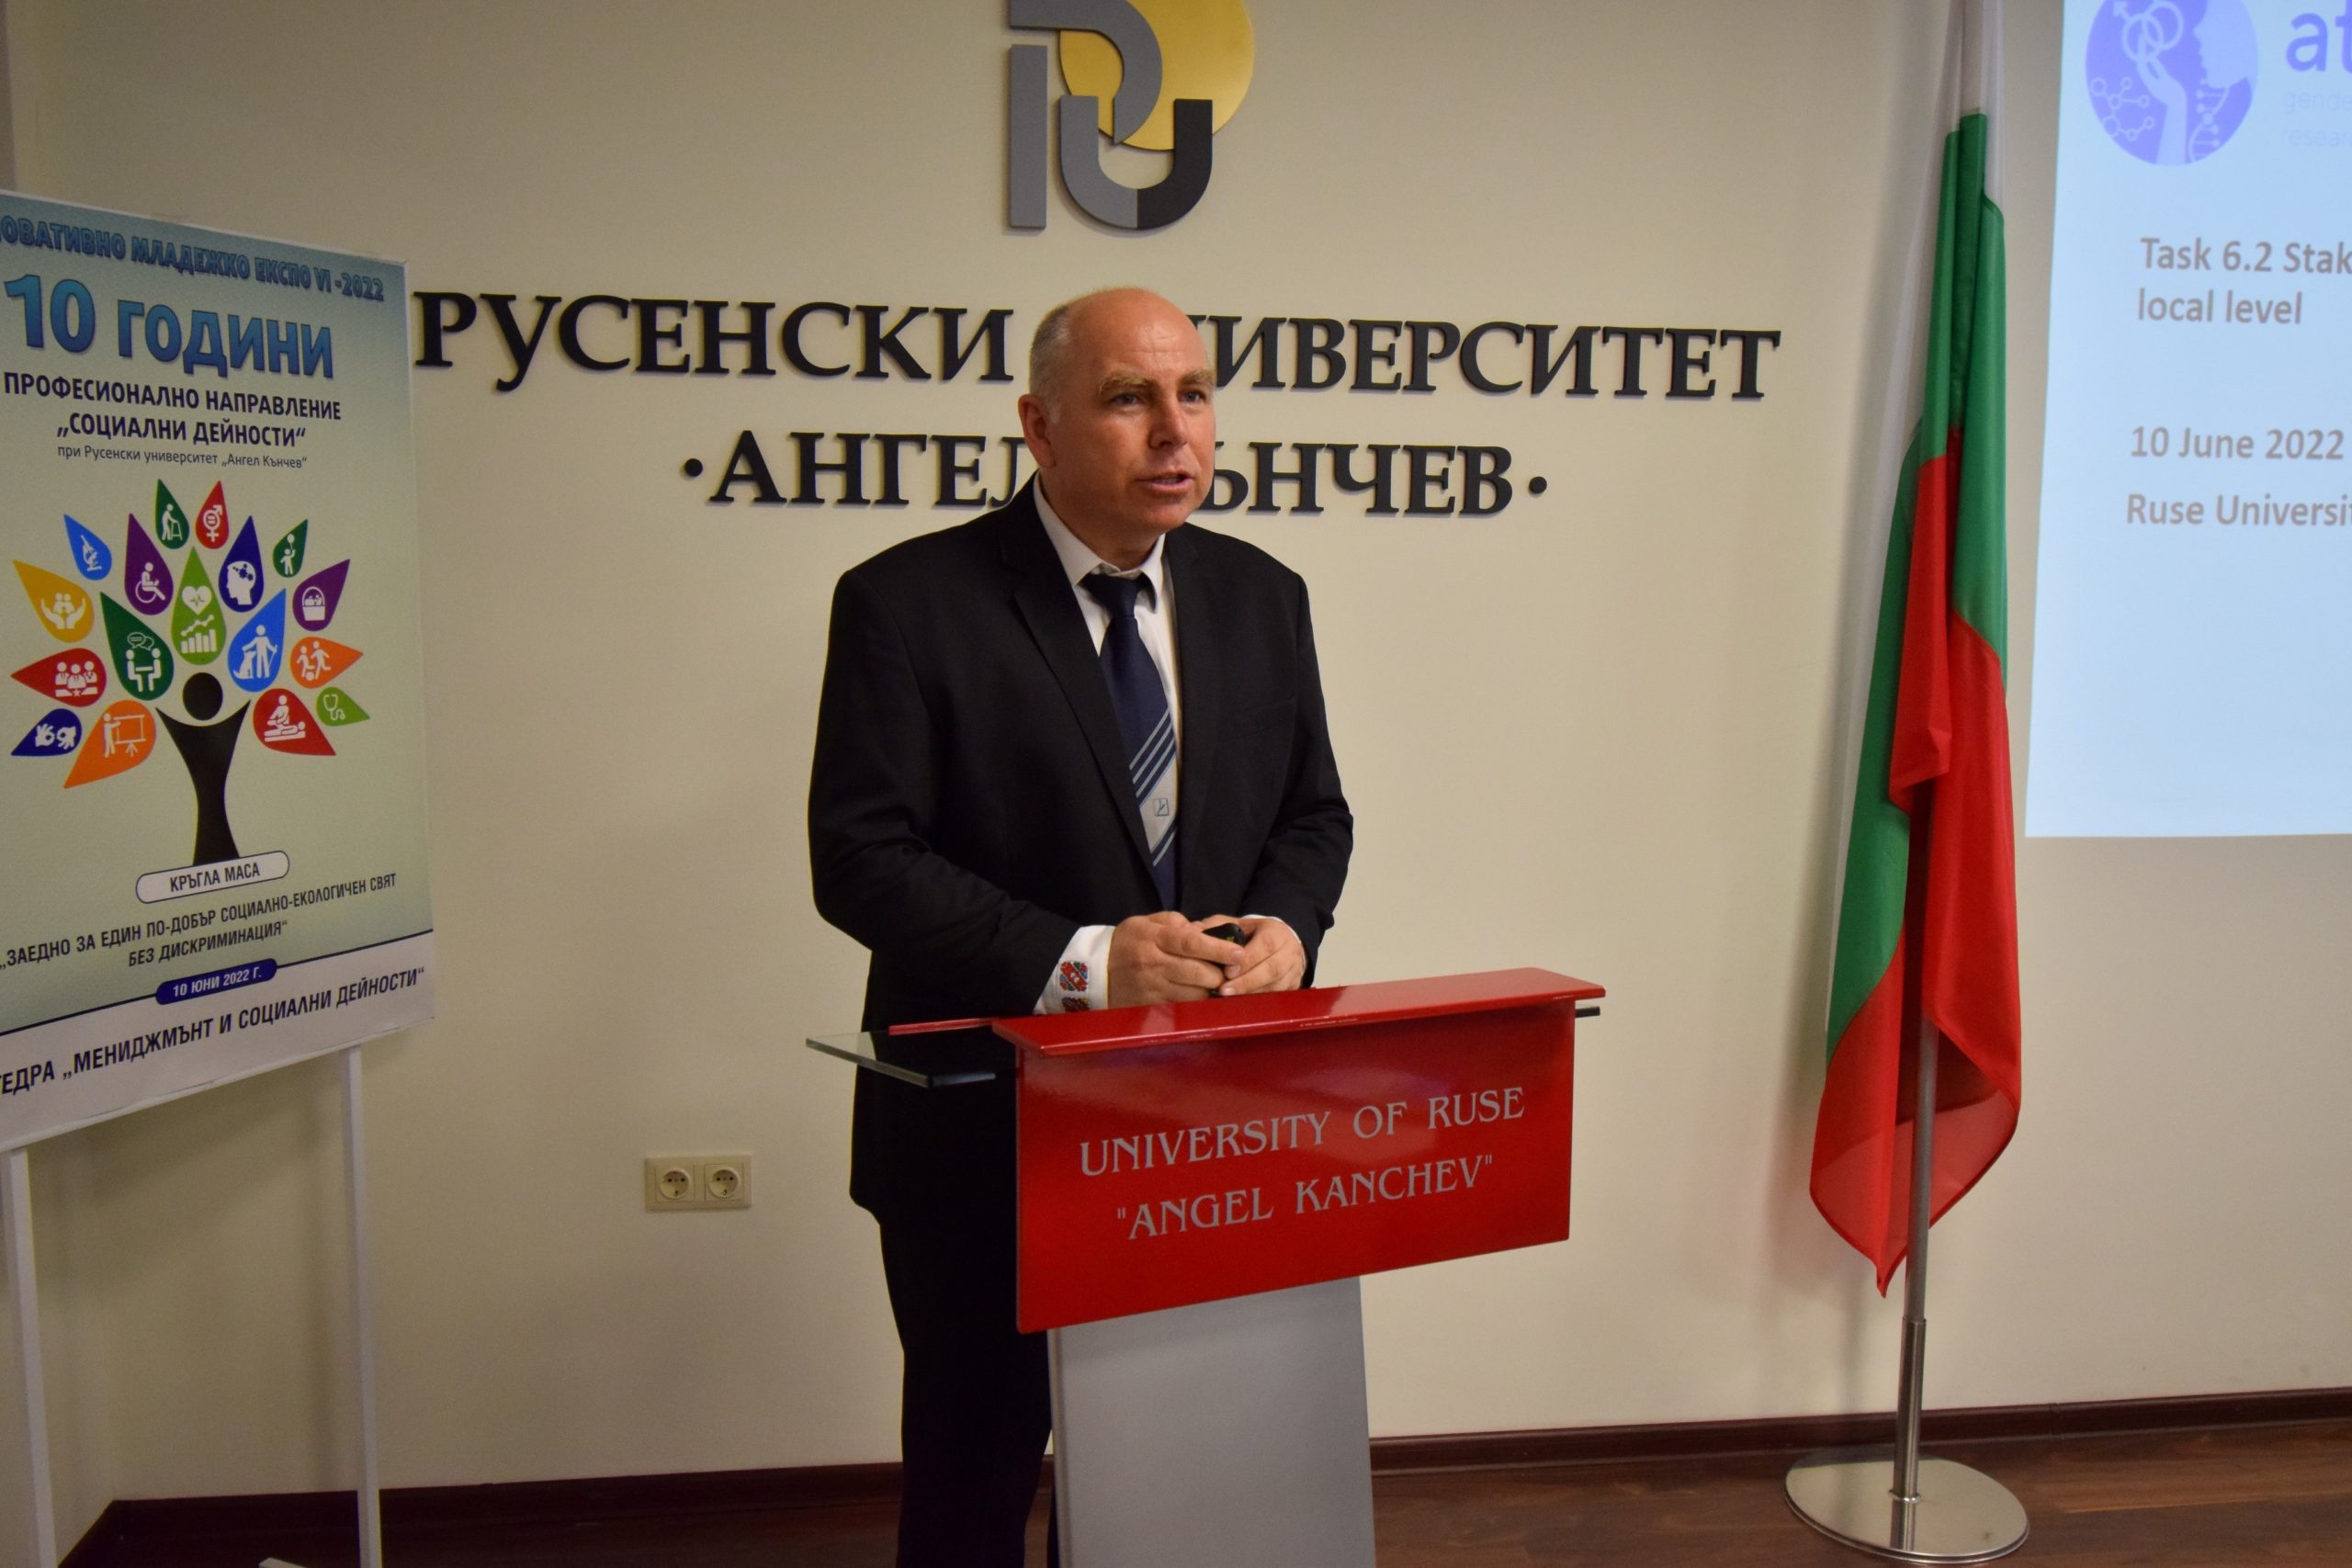 The University of Ruse “Angel Kanchev” presented its Gender Equality Plan to key stakeholders